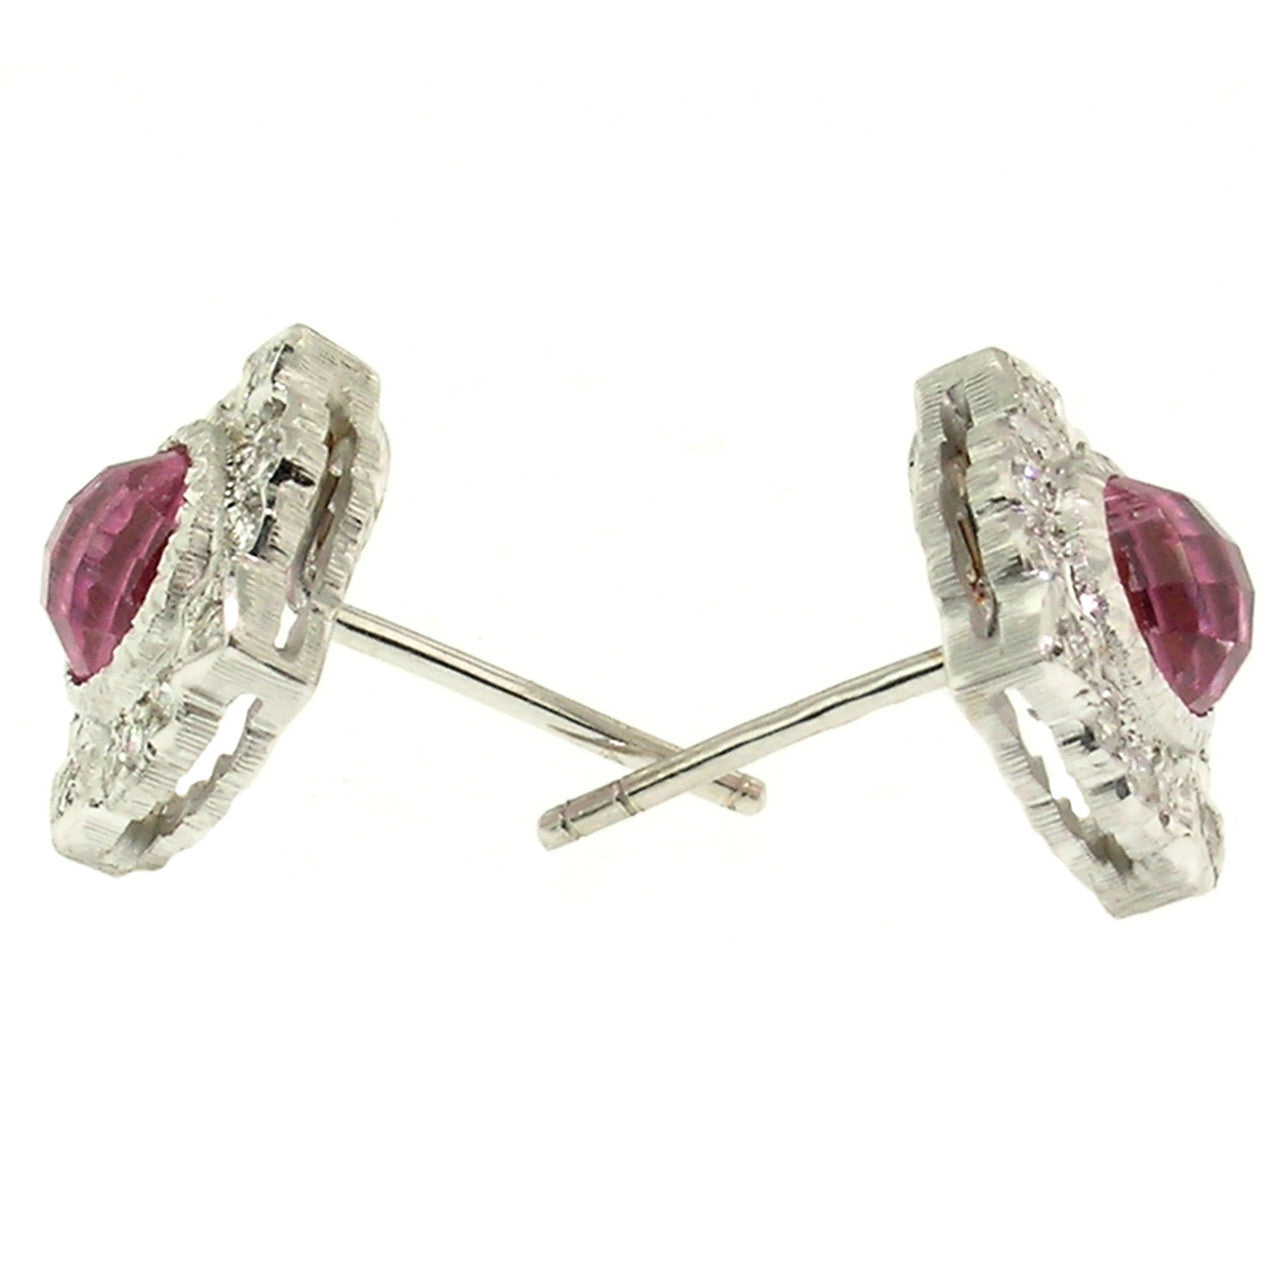 Maine Tourmaline Diamond 18kt Alessia Earrings made in Florence, Italy by Cynthia Scott Jewelry